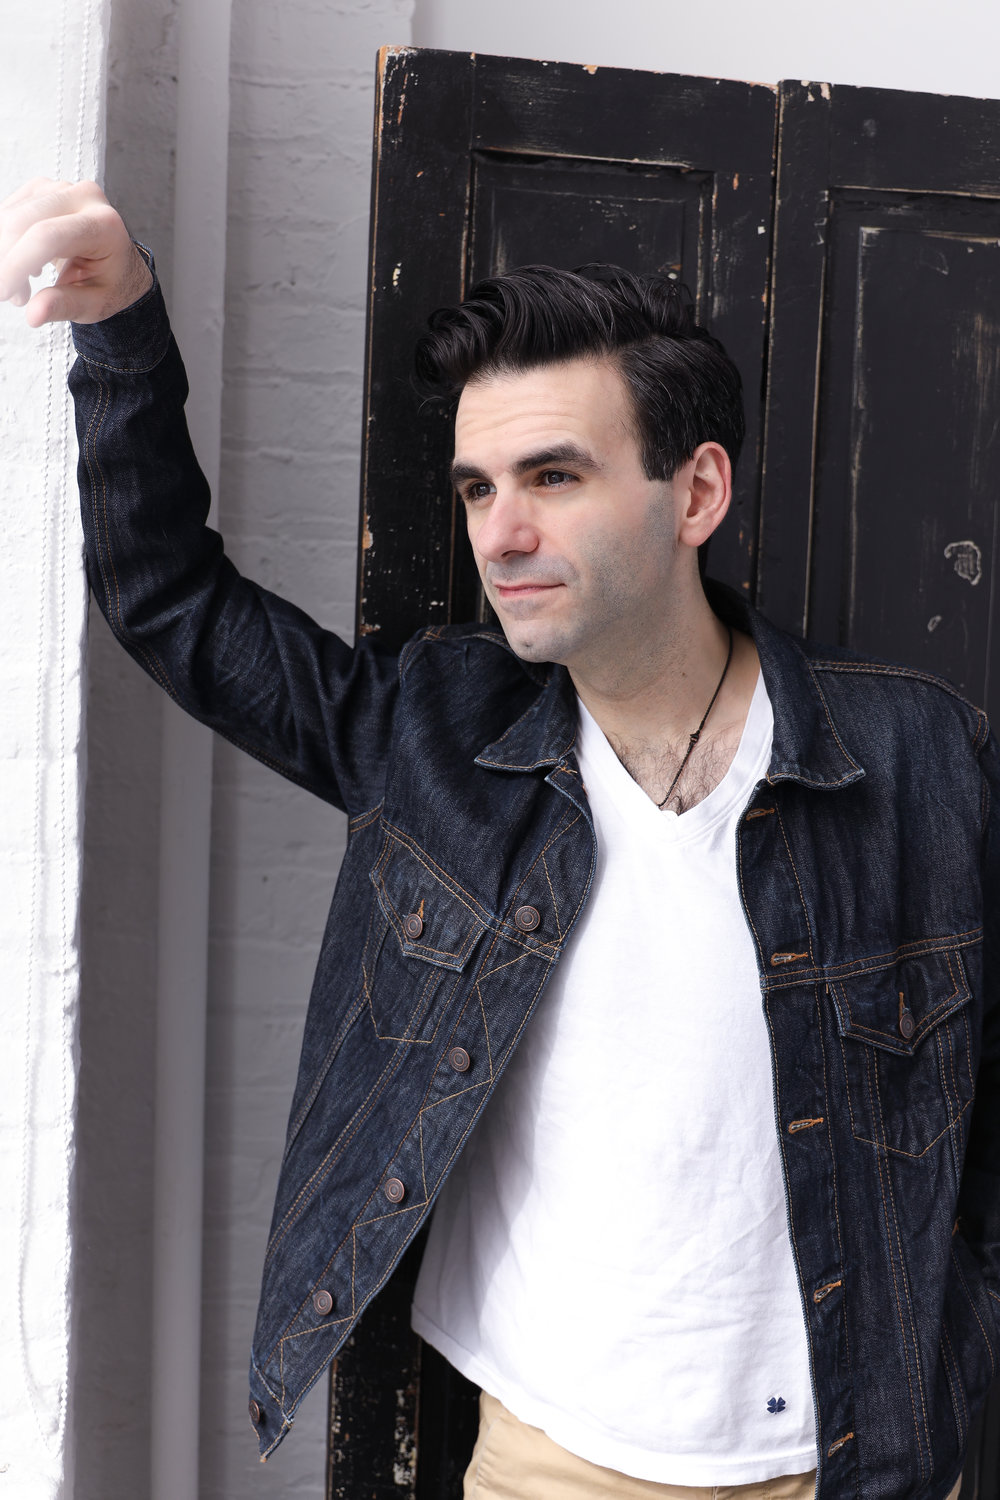 A self-described “musical theater nerd,” Joe Iconis set his sights on conquering Broadway in childhood.